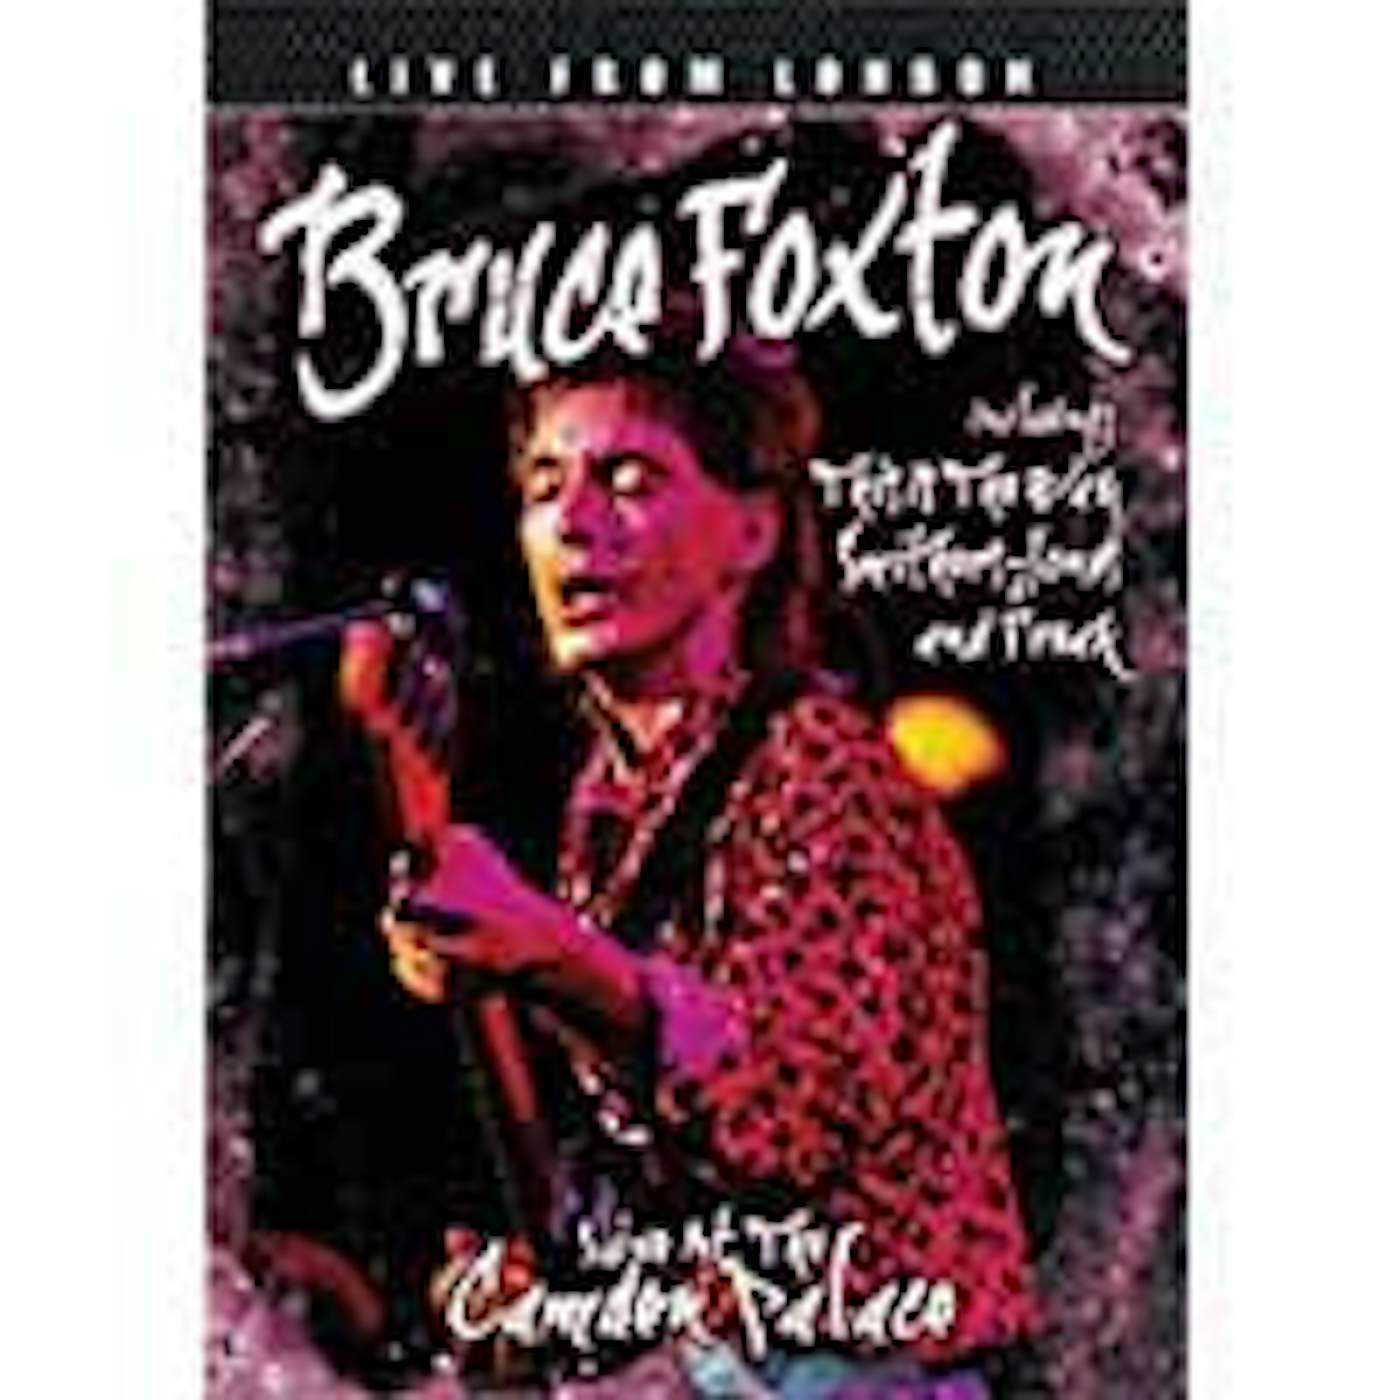 Bruce Foxton    ( The Jam) DVD - Live From London